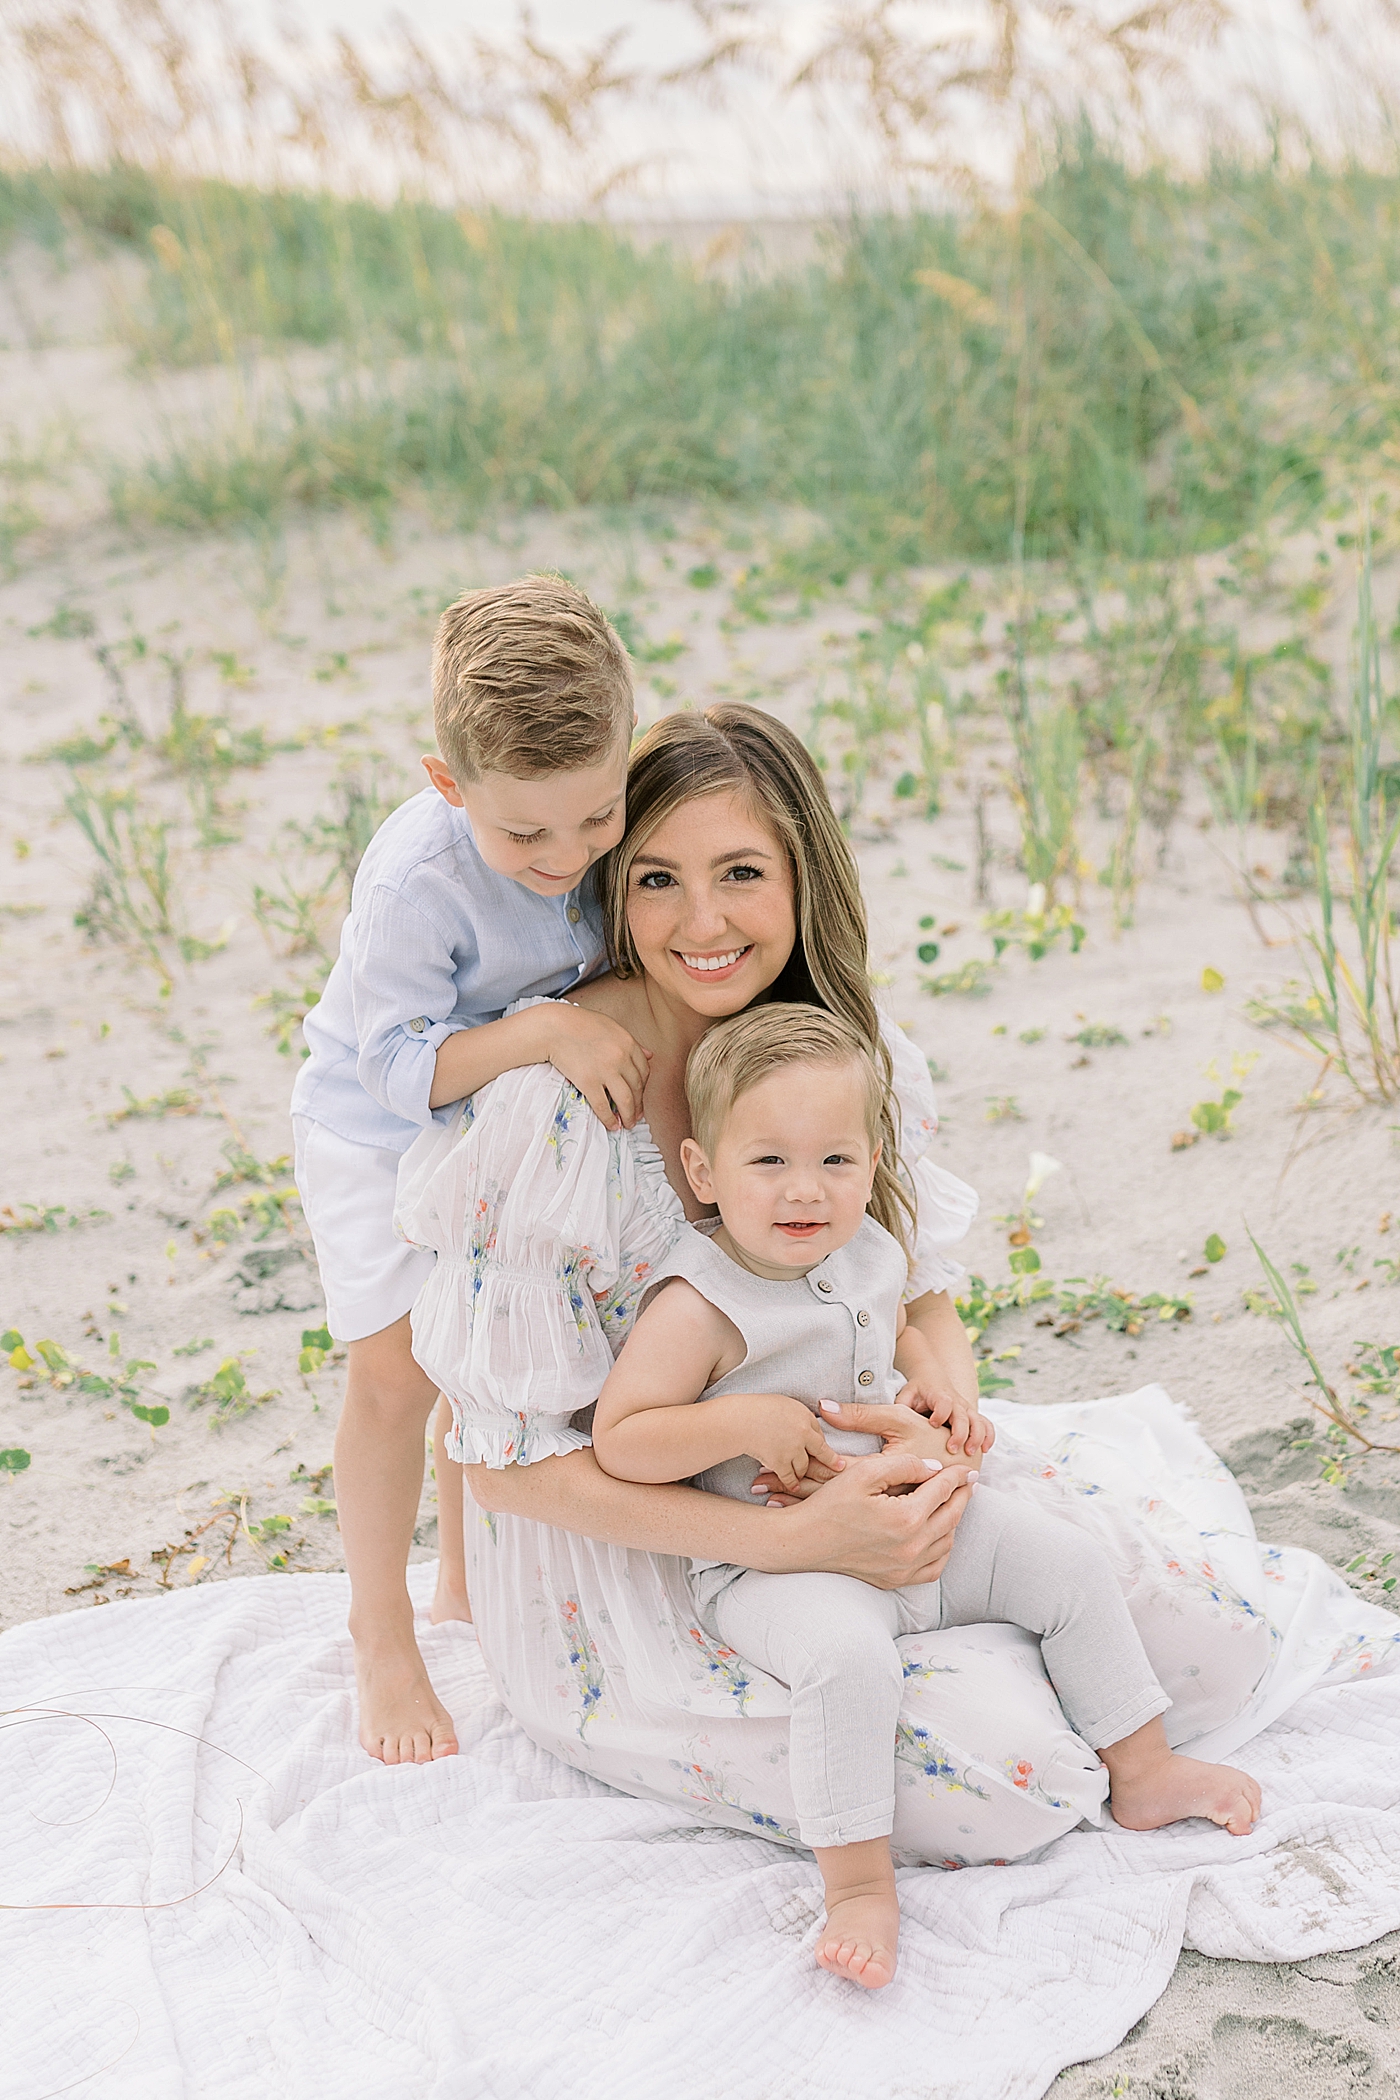 Mom with her two little boys on the beach | Image by Caitlyn Motycka